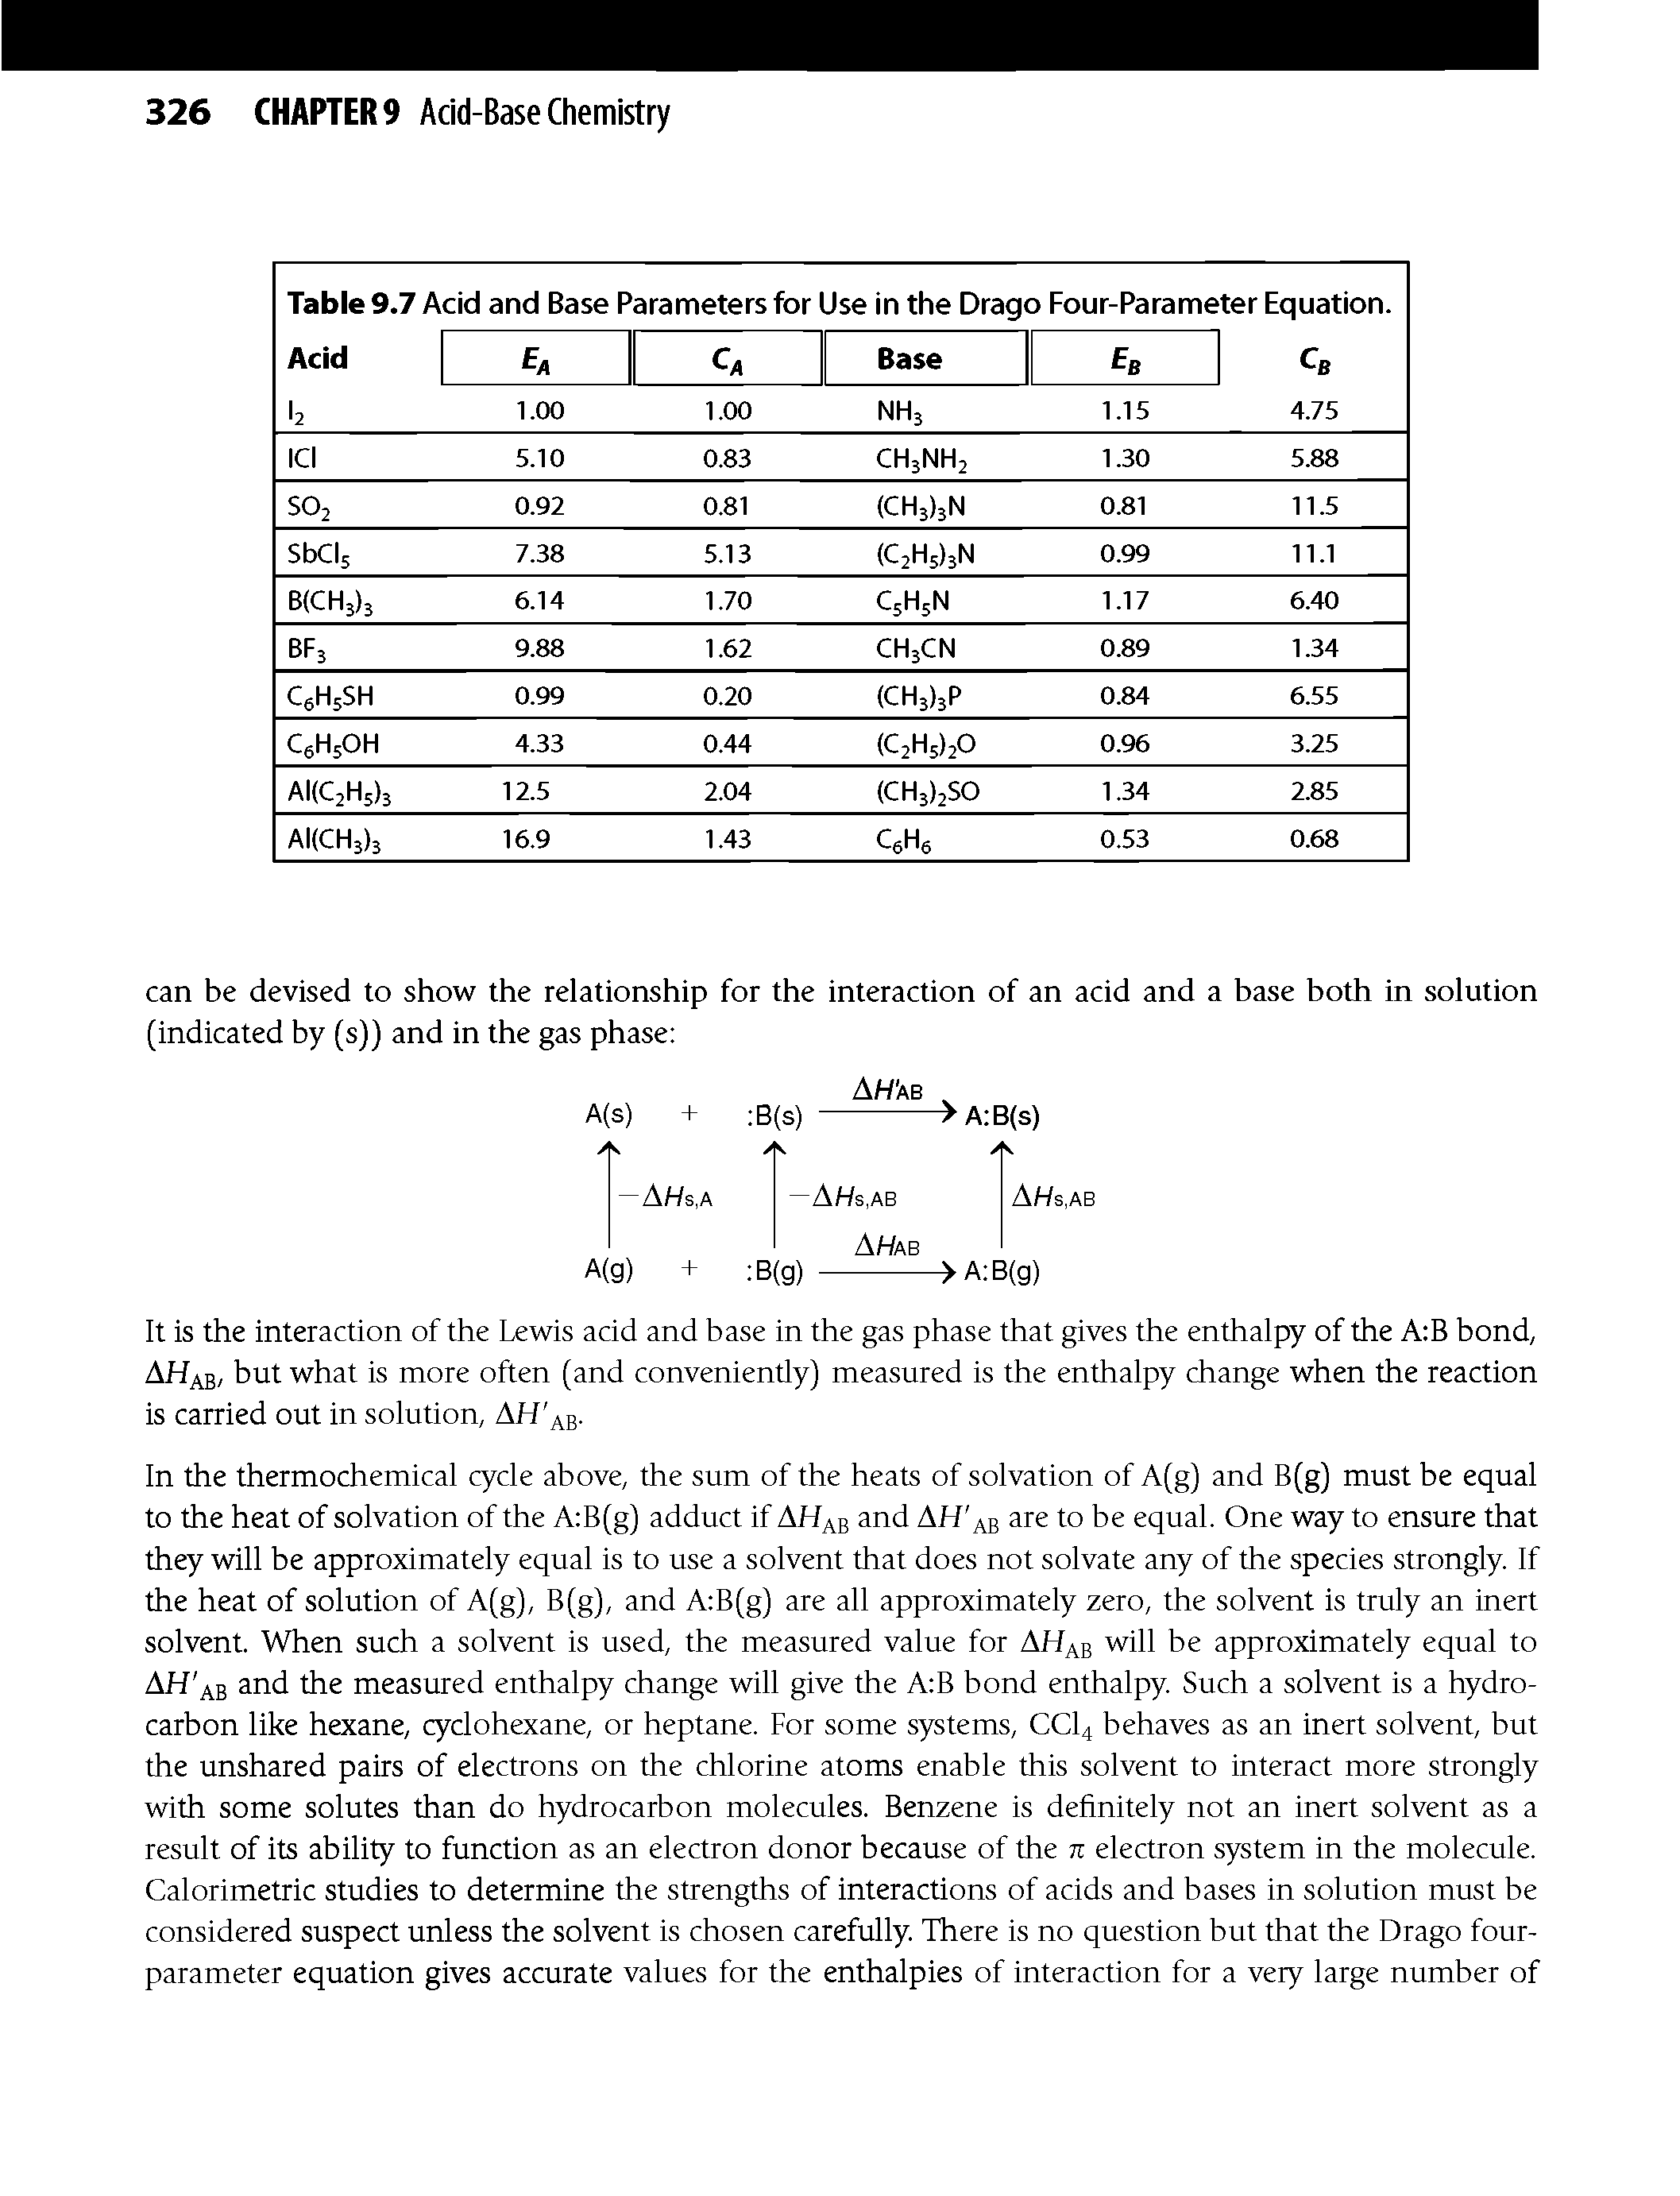 Table 9.7 Acid and Base Parameters for Use in the Drago Four-Parameter Equation.